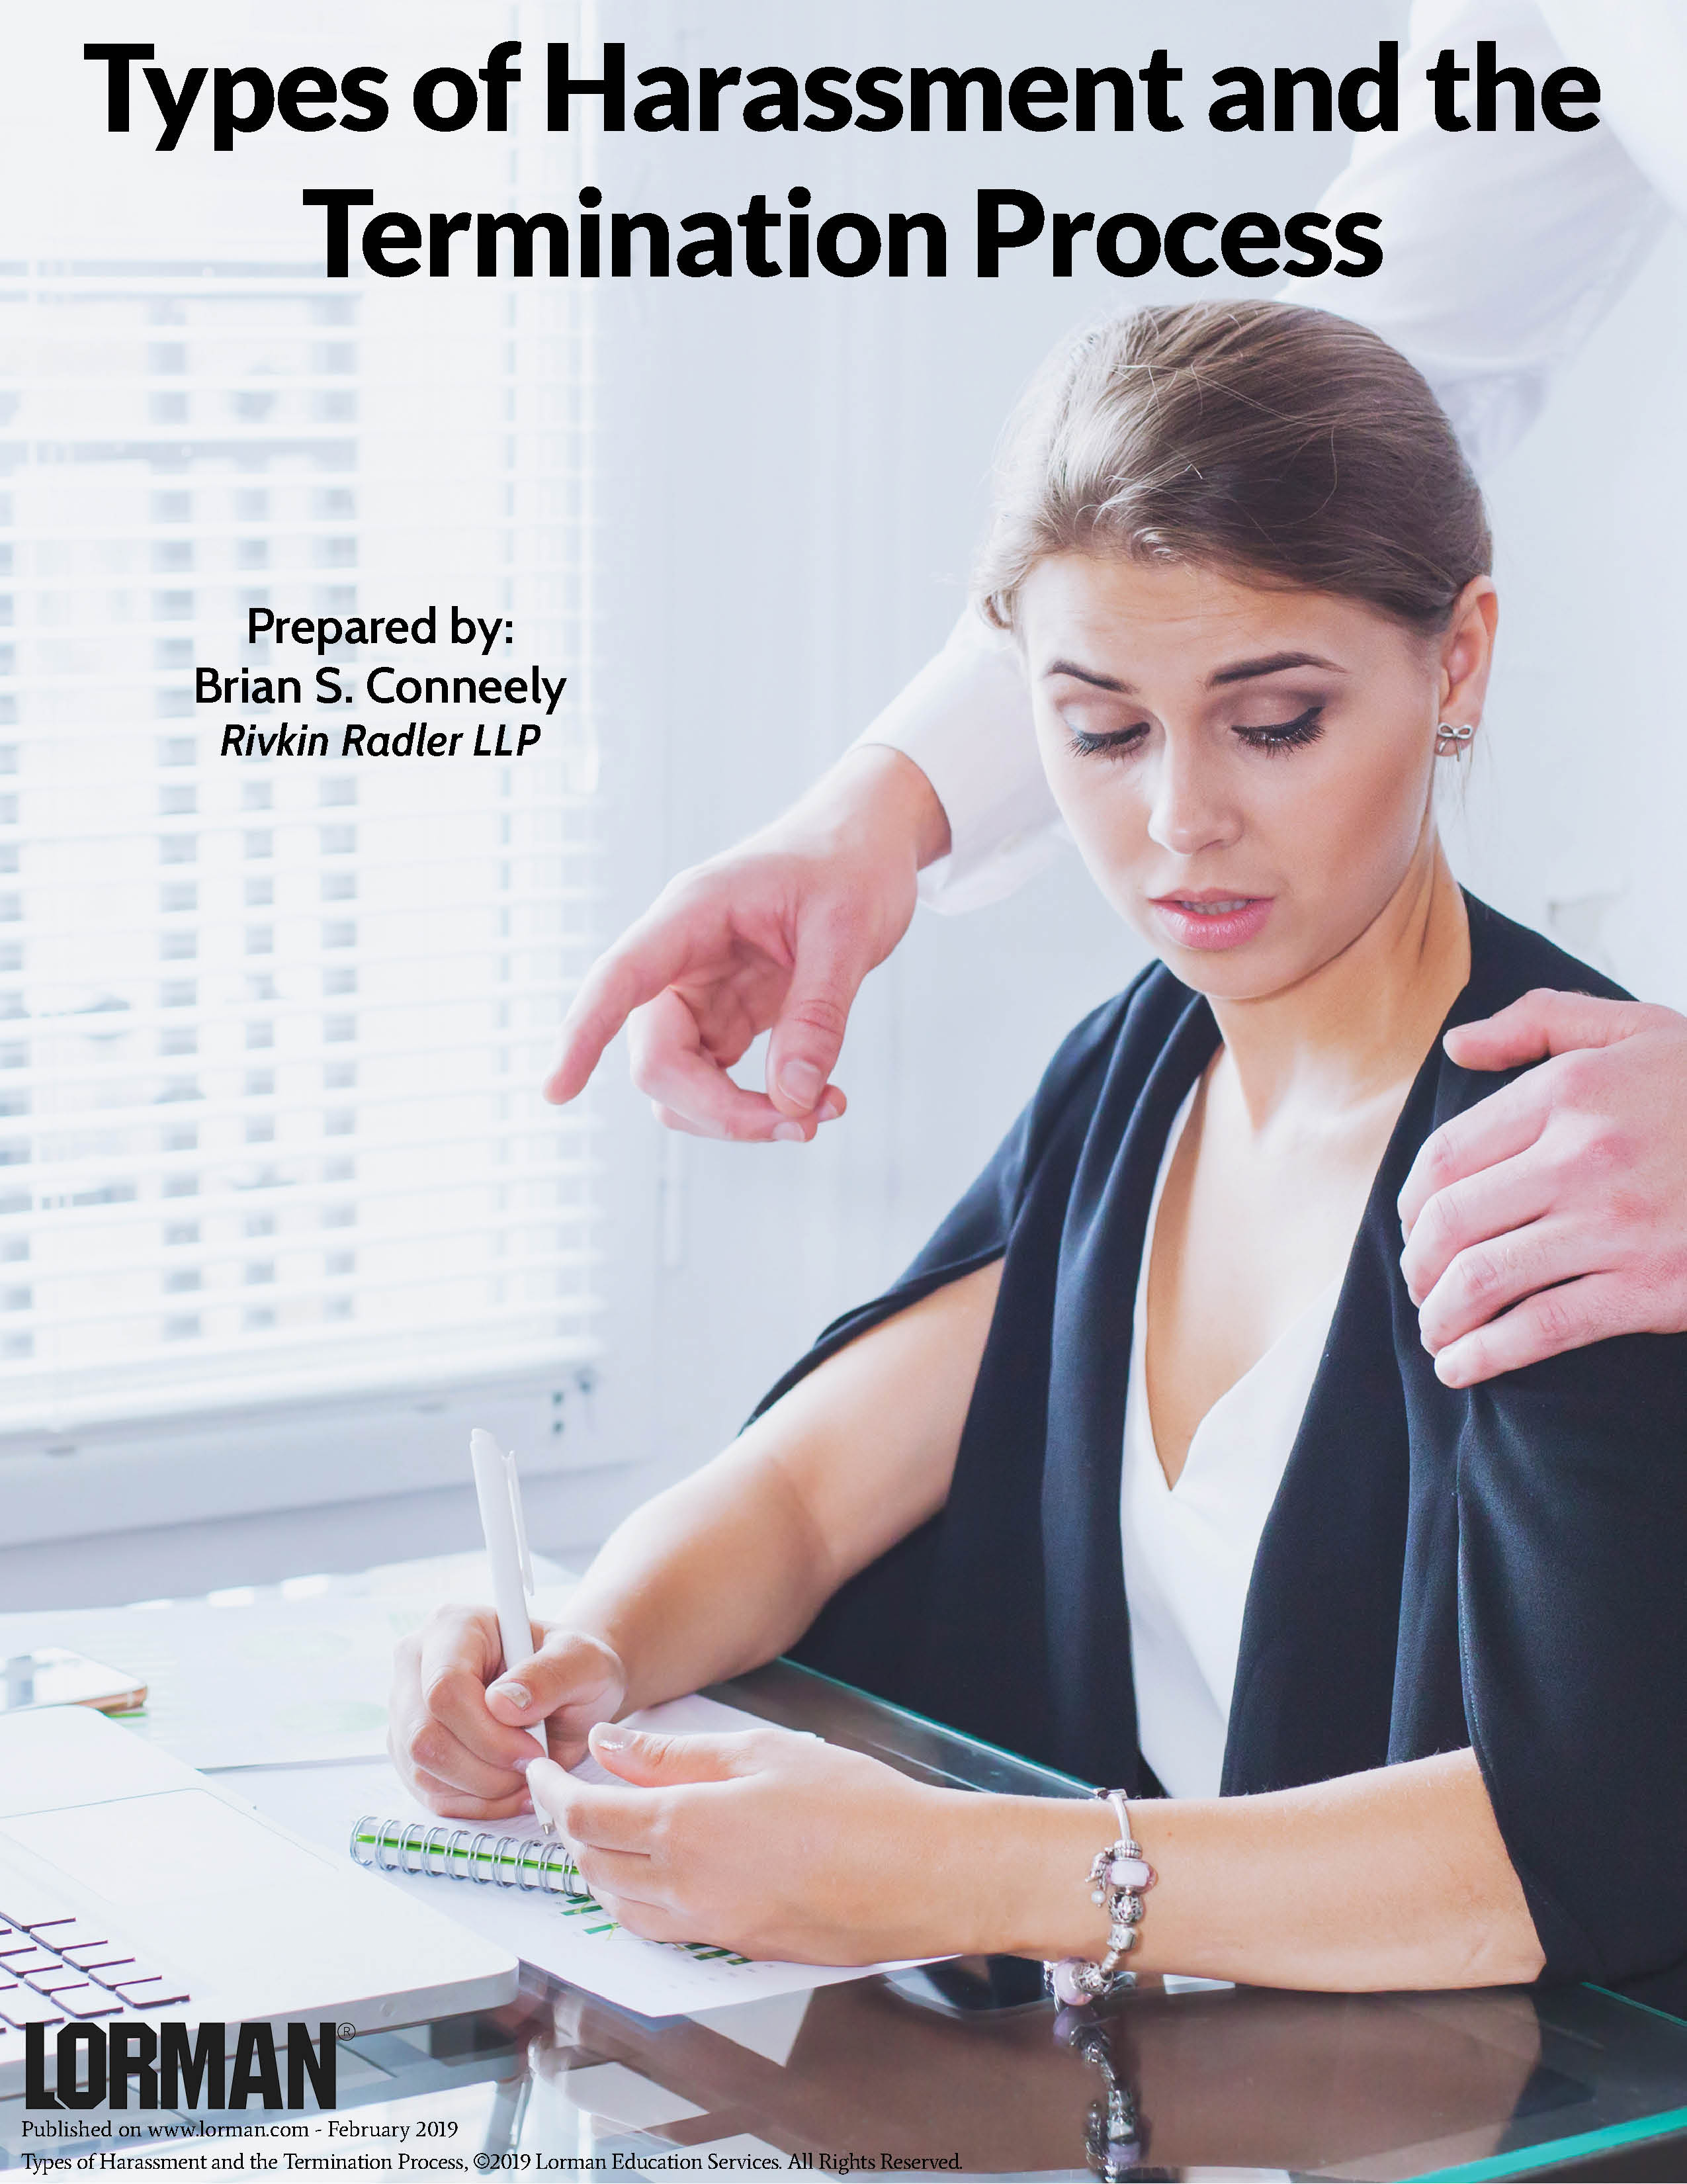 Types of Harassment and the Termination Process